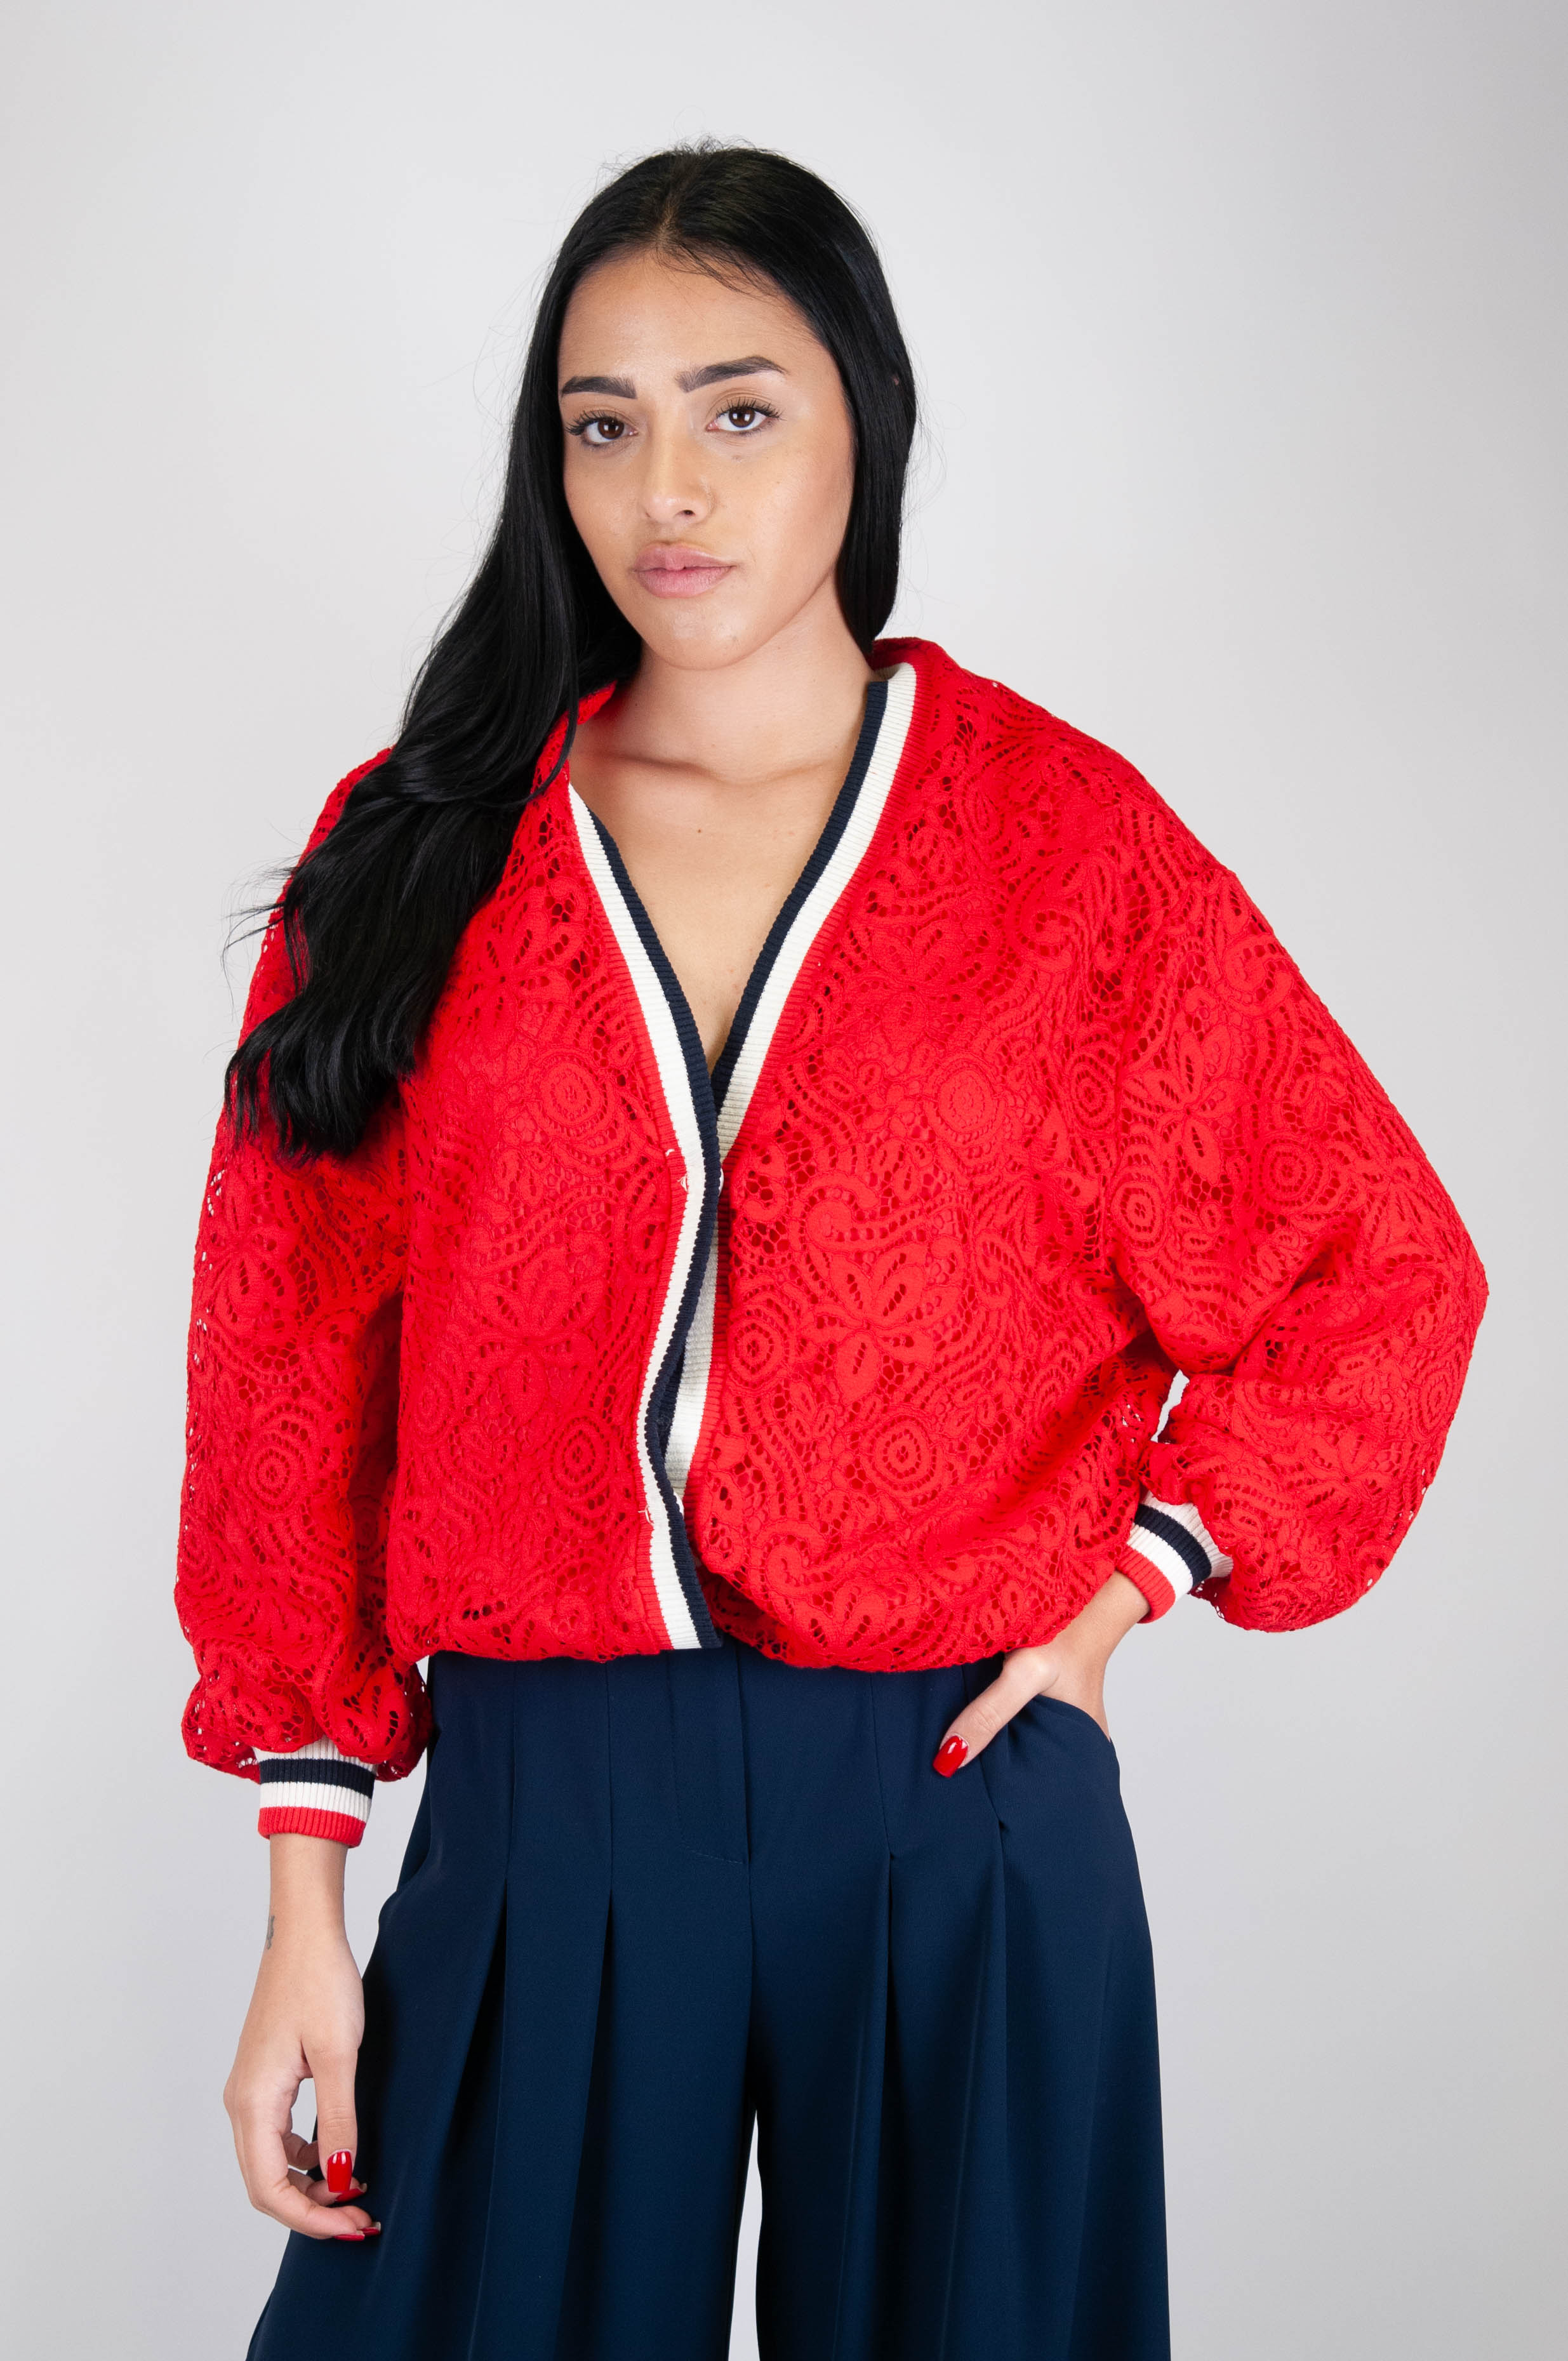 Tension in - Lace bomber jacket with contrasting profiles